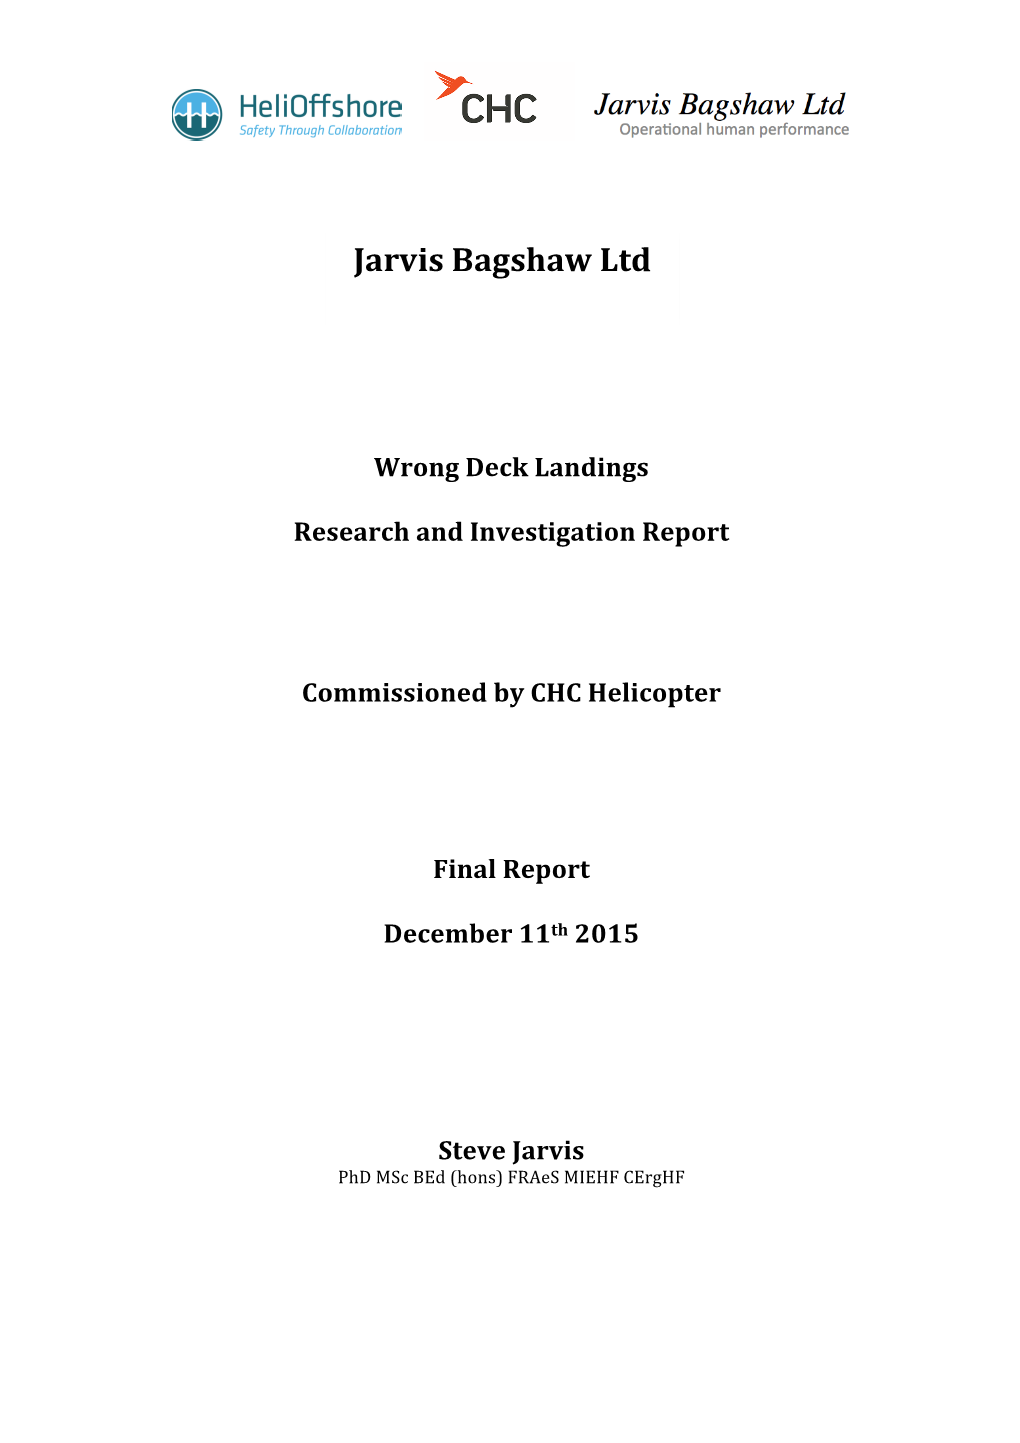 To Read the Final Wrong Deck Landings Report